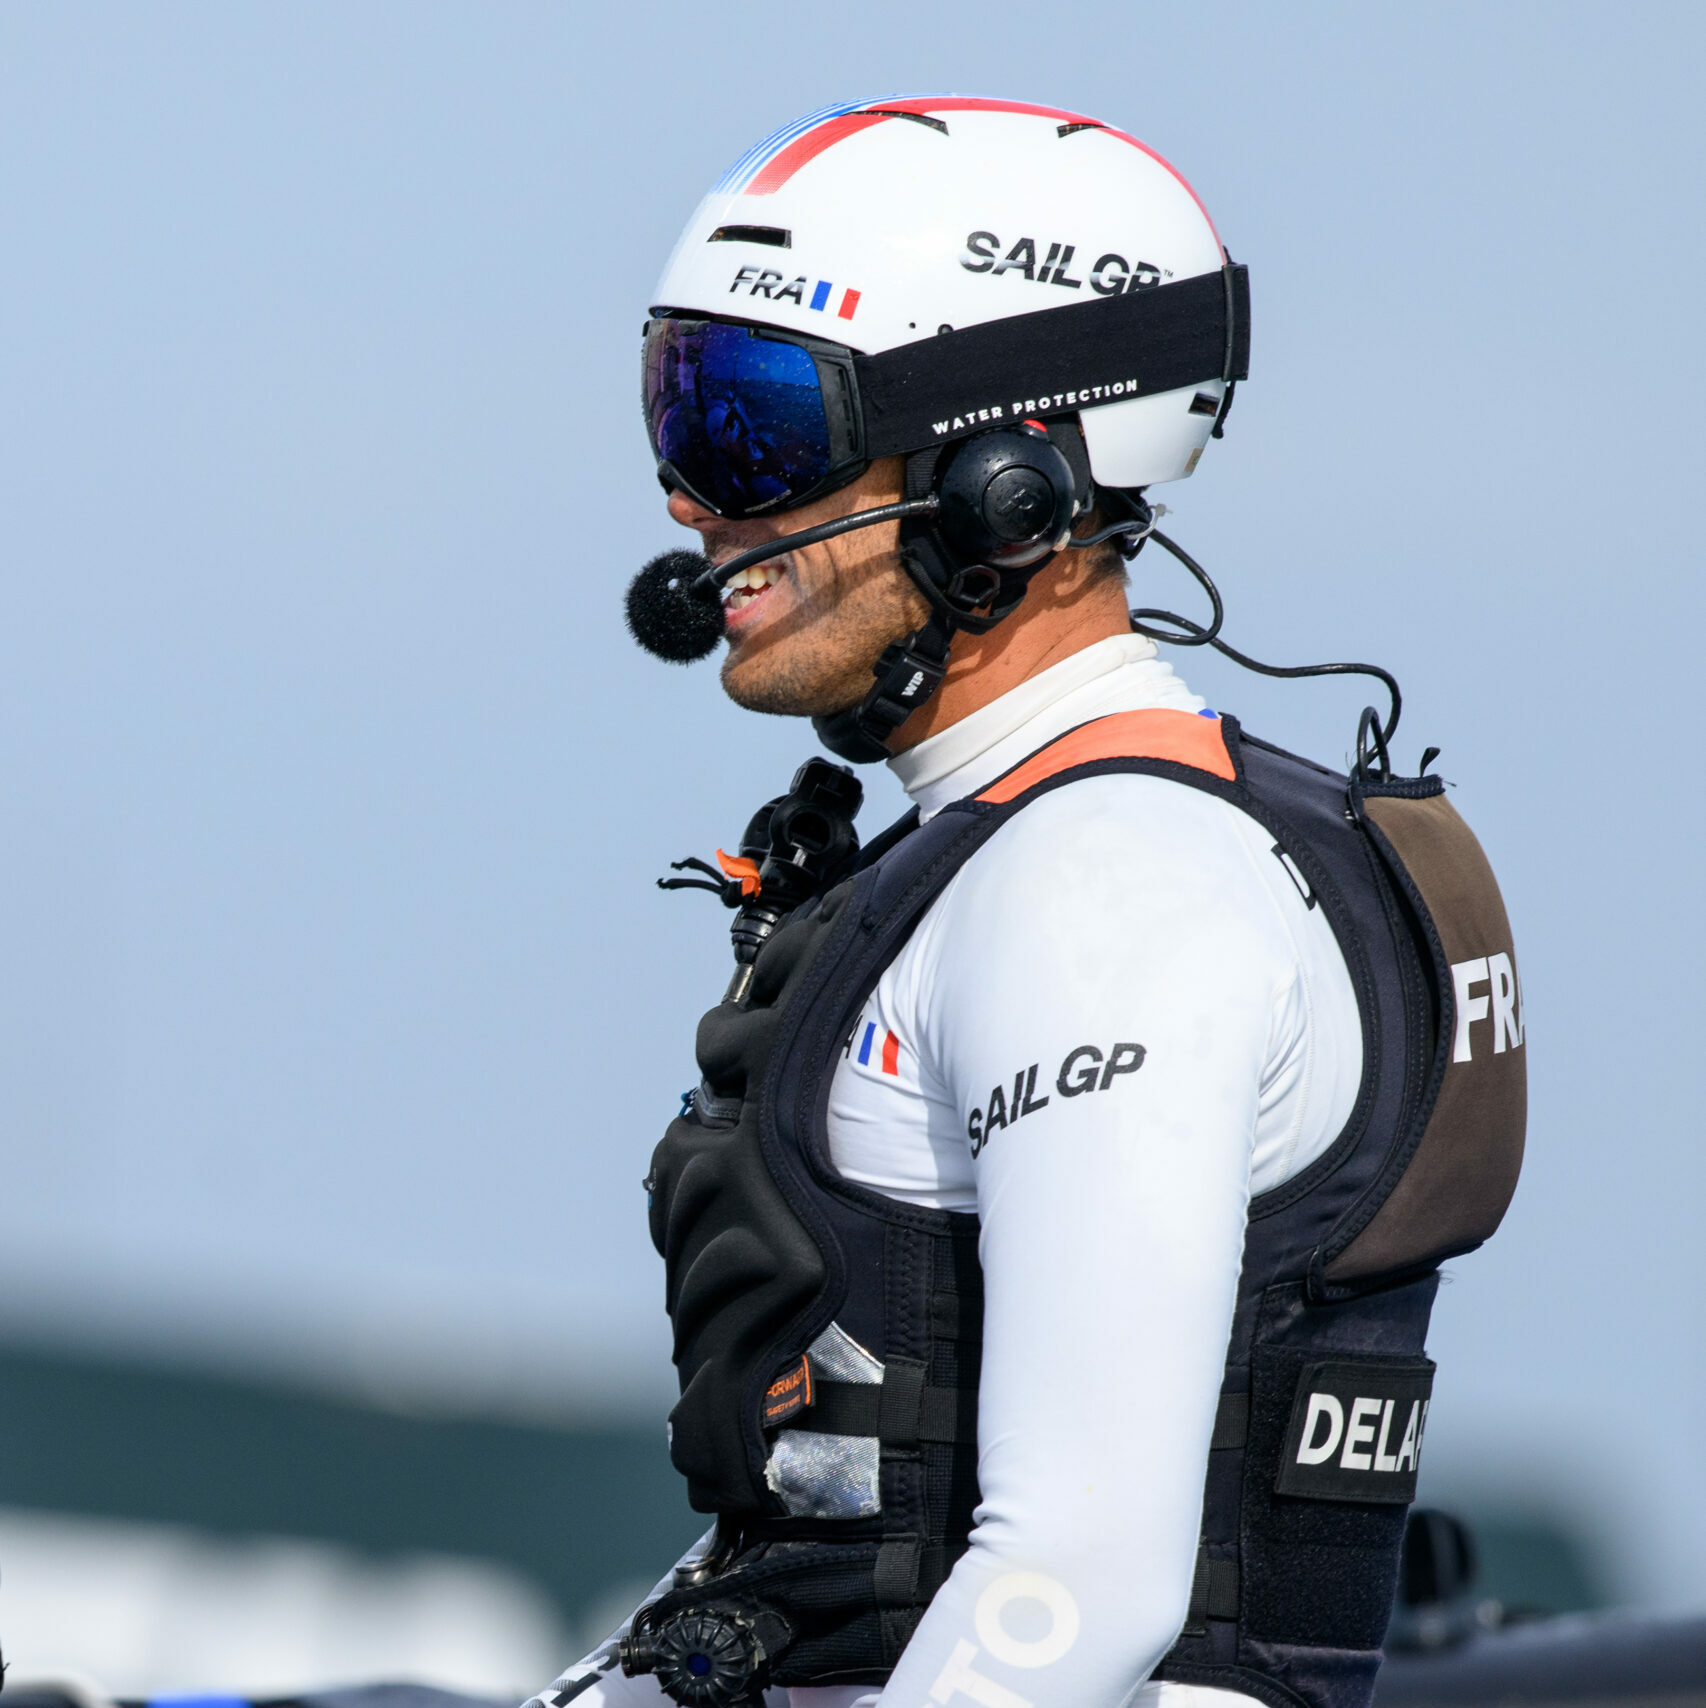 Quentin Delapierre, driver of France SailGP Team in action on Race Day 2 of the Spain Sail Grand Prix in Cadiz, Andalusia, Spain. 25th September 2022. Photo: Ricardo Pinto for SailGP. Handout image supplied by SailGP